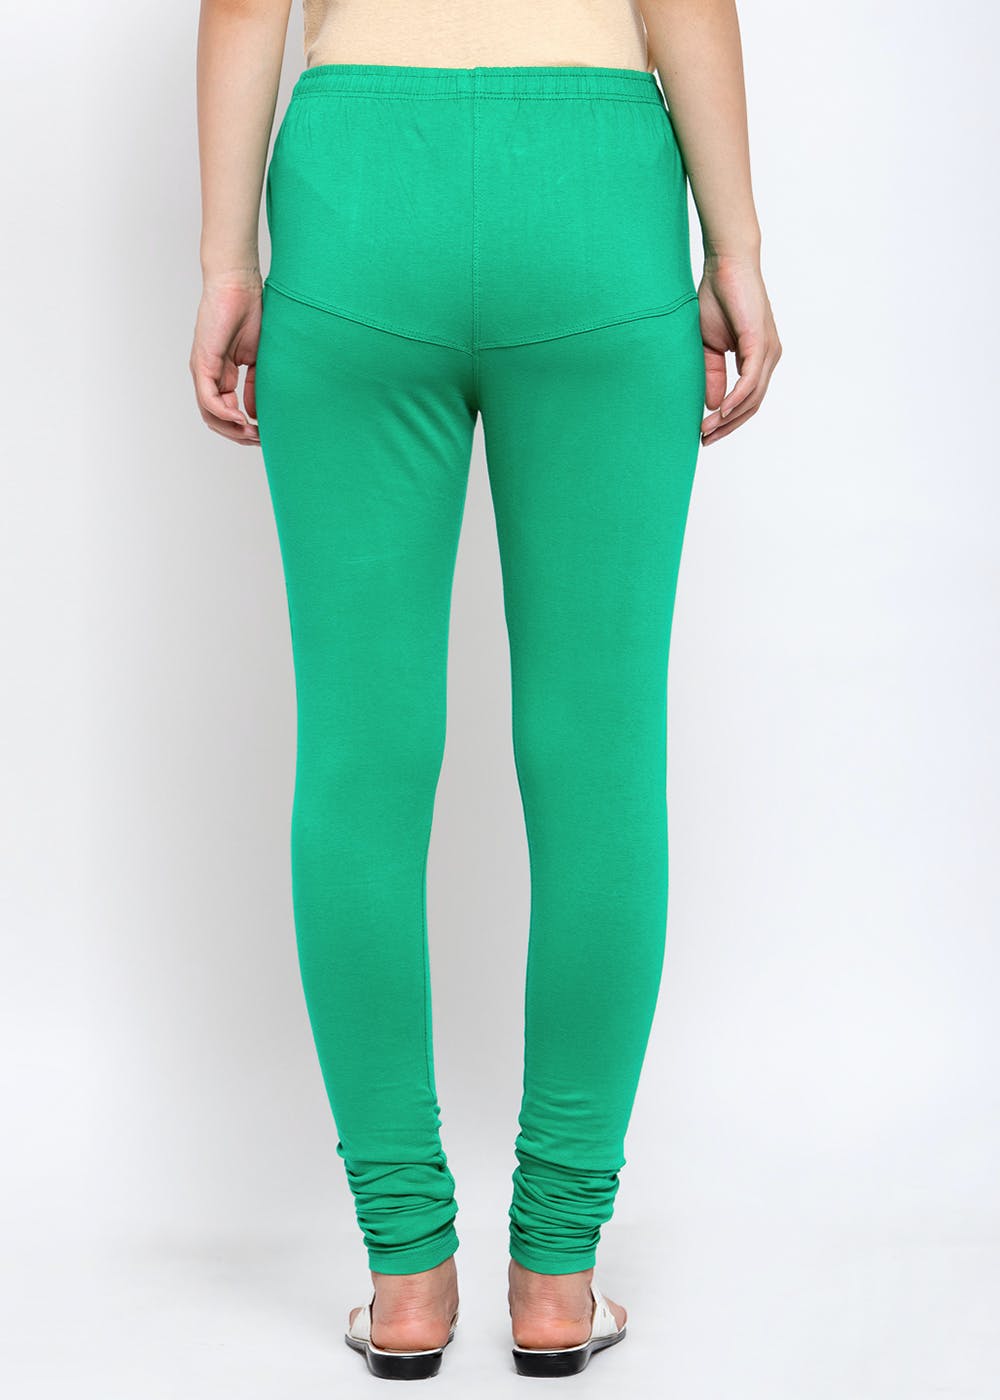 Women Solid Cotton Lycra Super Quality Sea Green Ankle Length Leggings